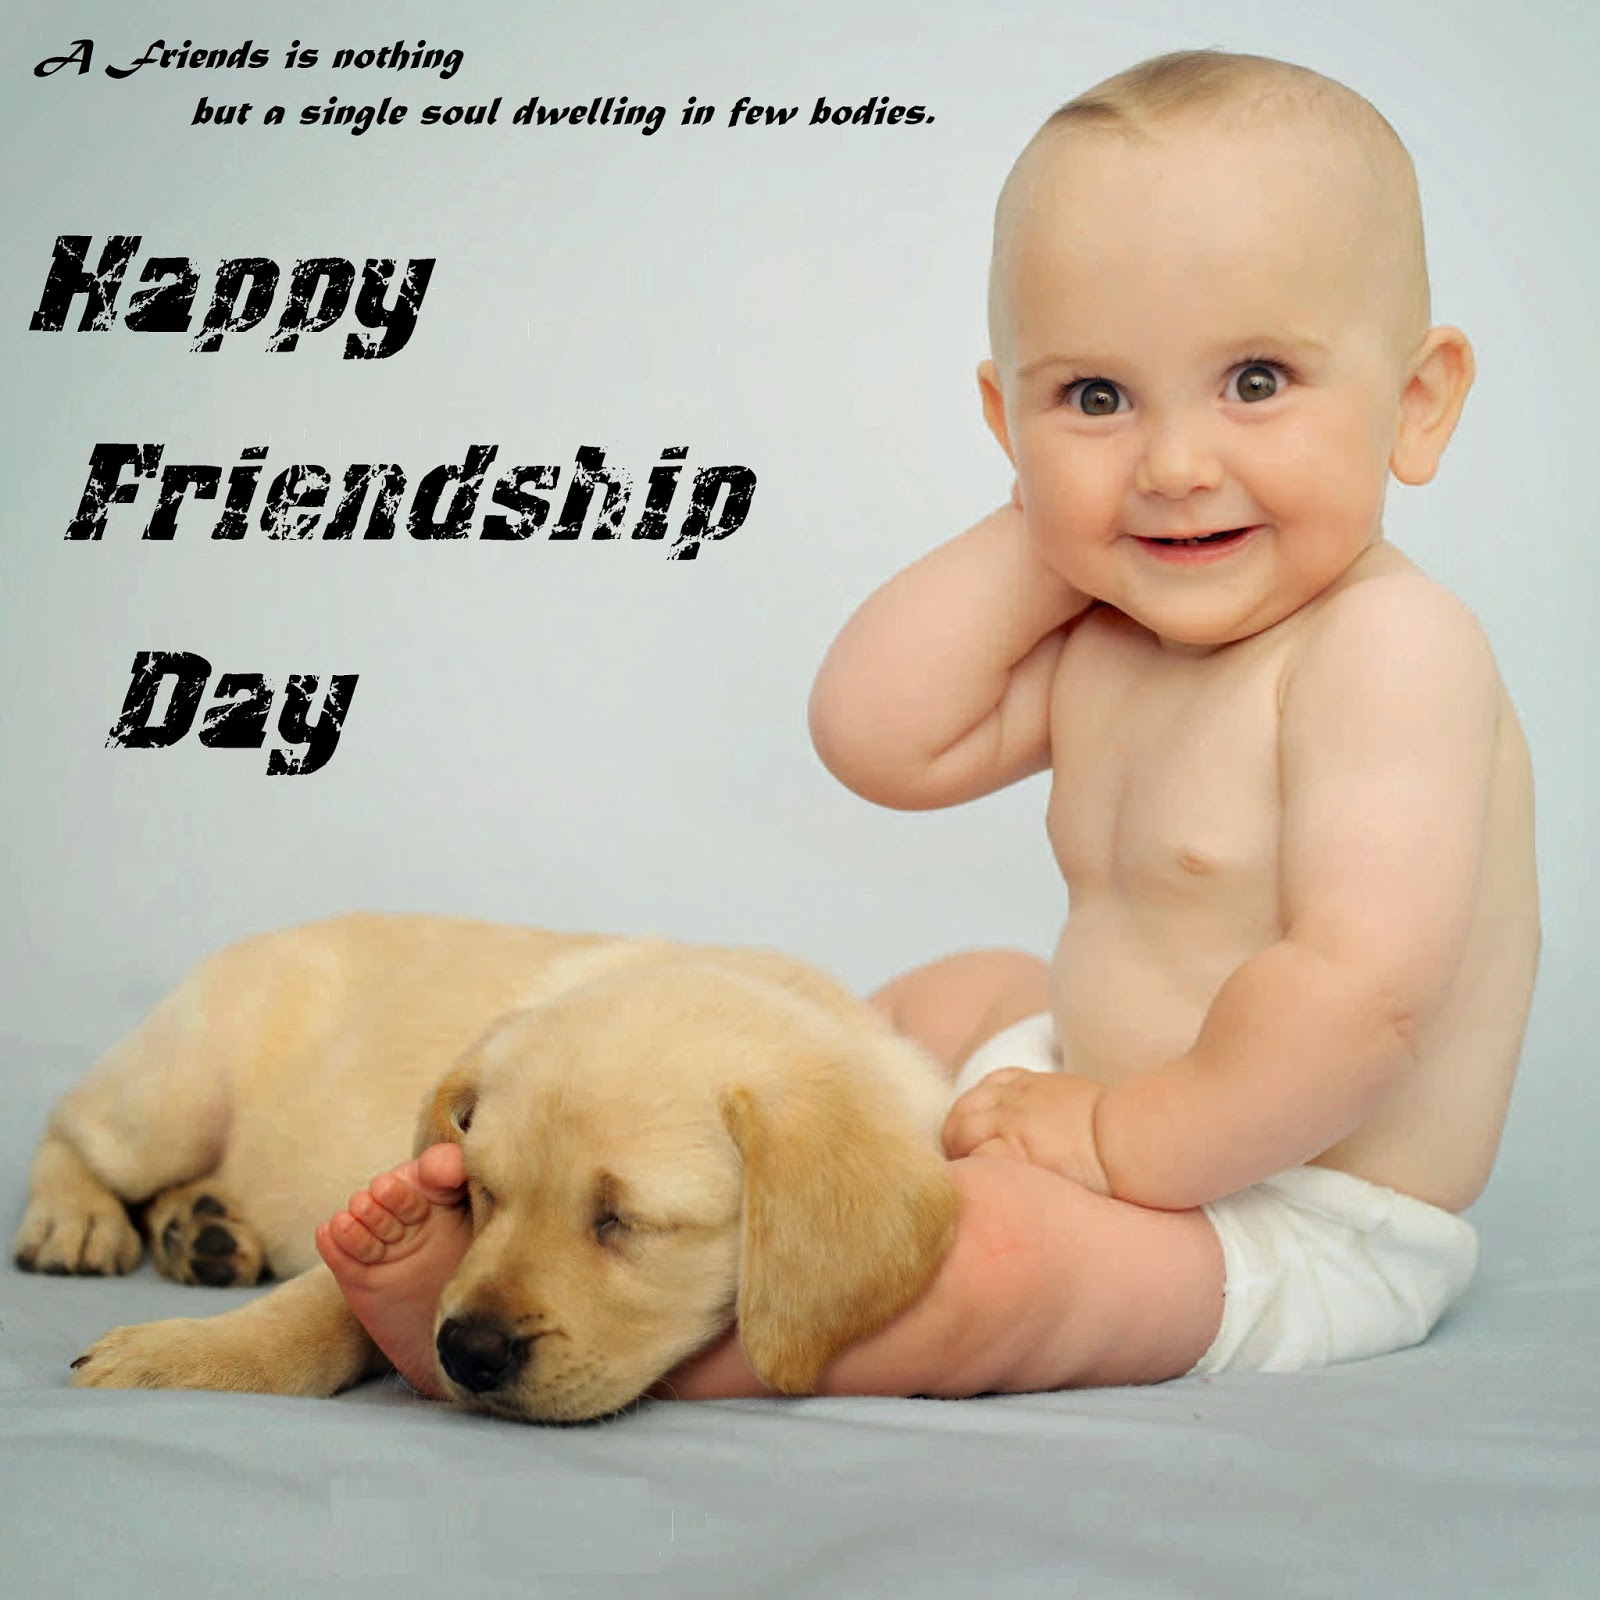 Cute Baby Boy Wishes Messages for Friendship Day ...